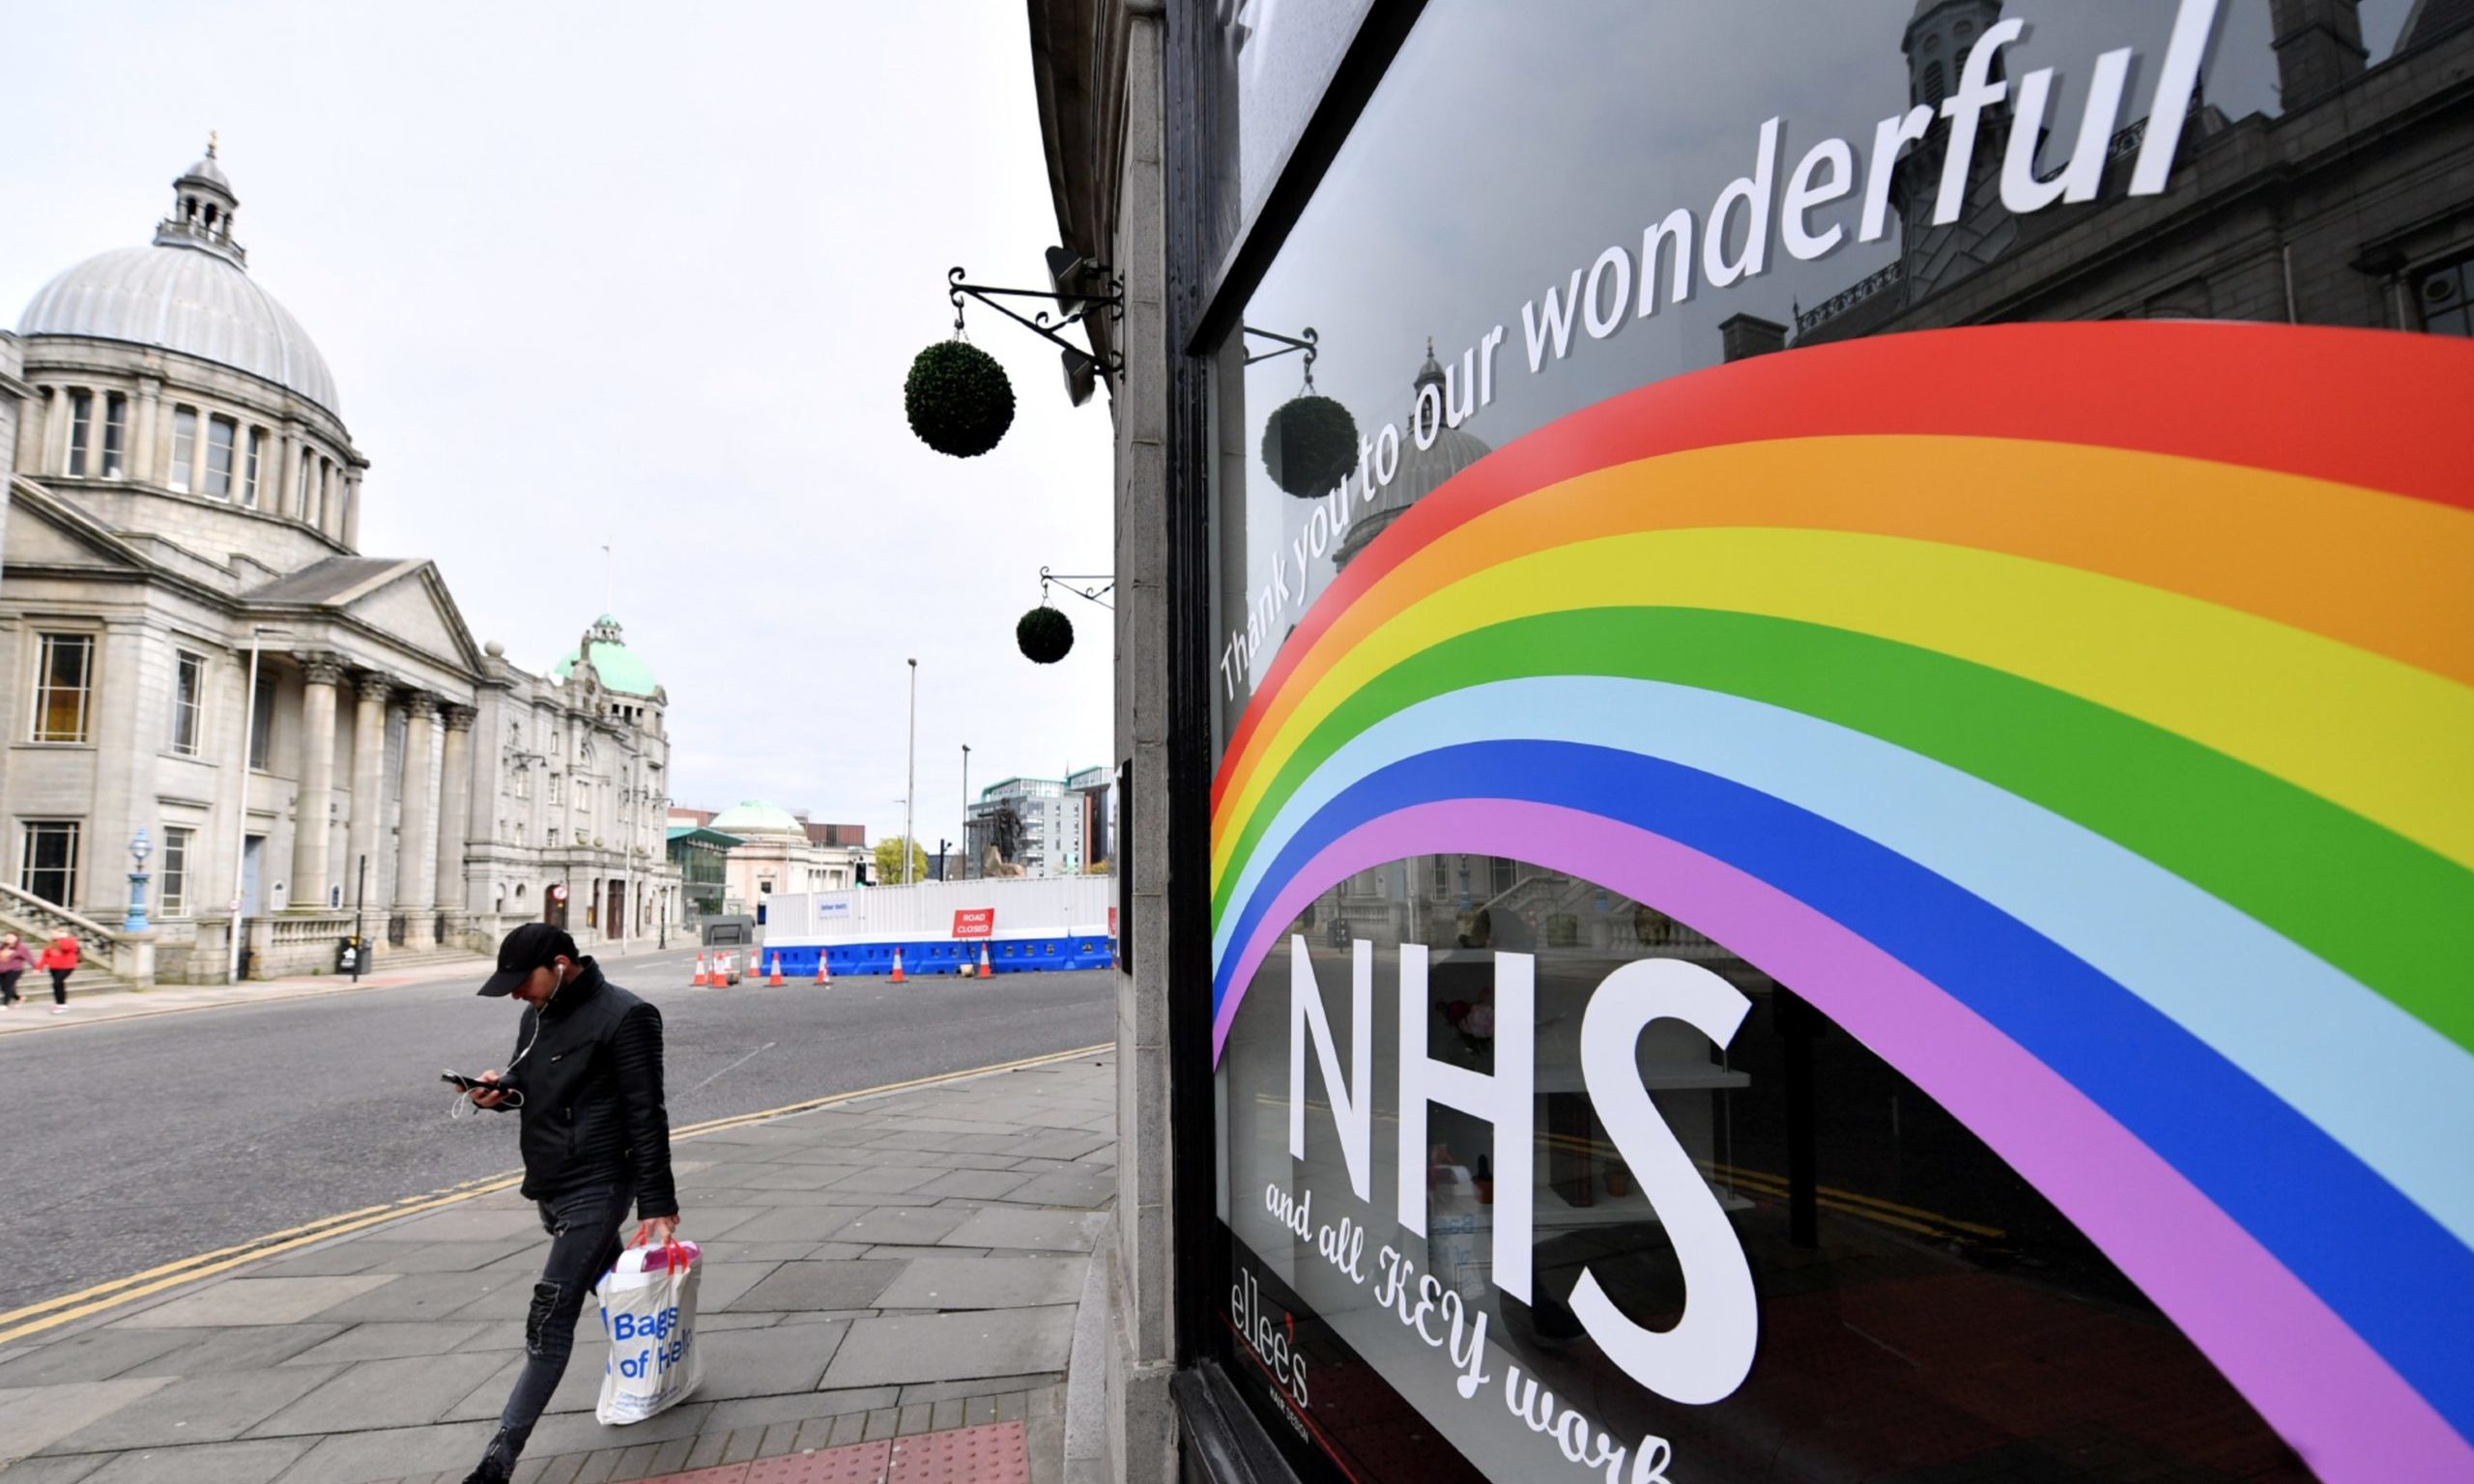 Throughout the pandemic, the public has shown support for the NHS with displays of colourful rainbows